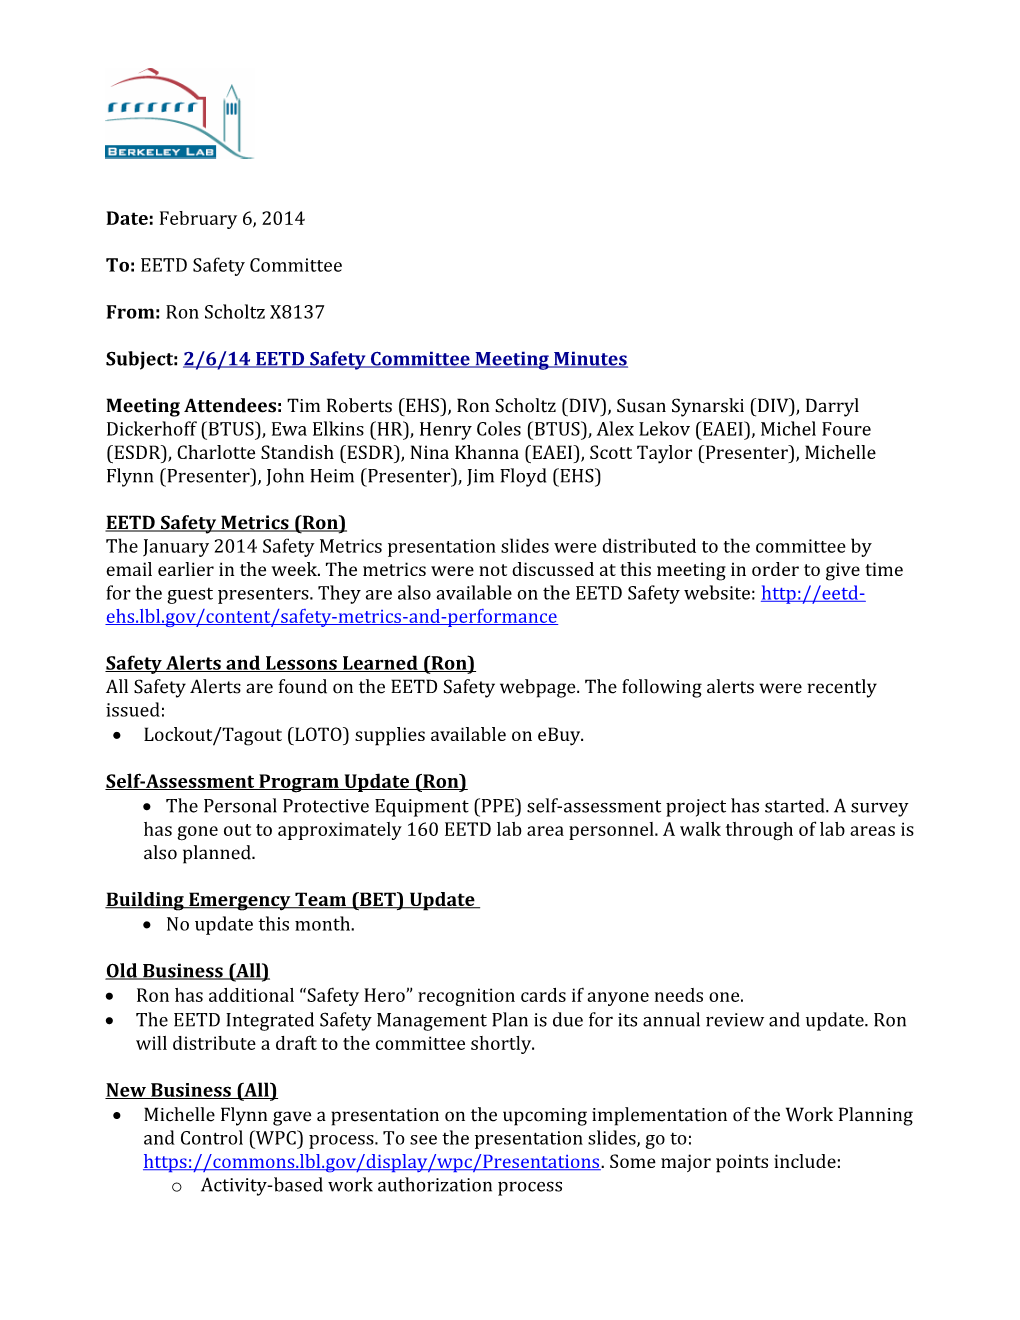 Subject:2/6/14 EETD Safety Committee Meeting Minutes